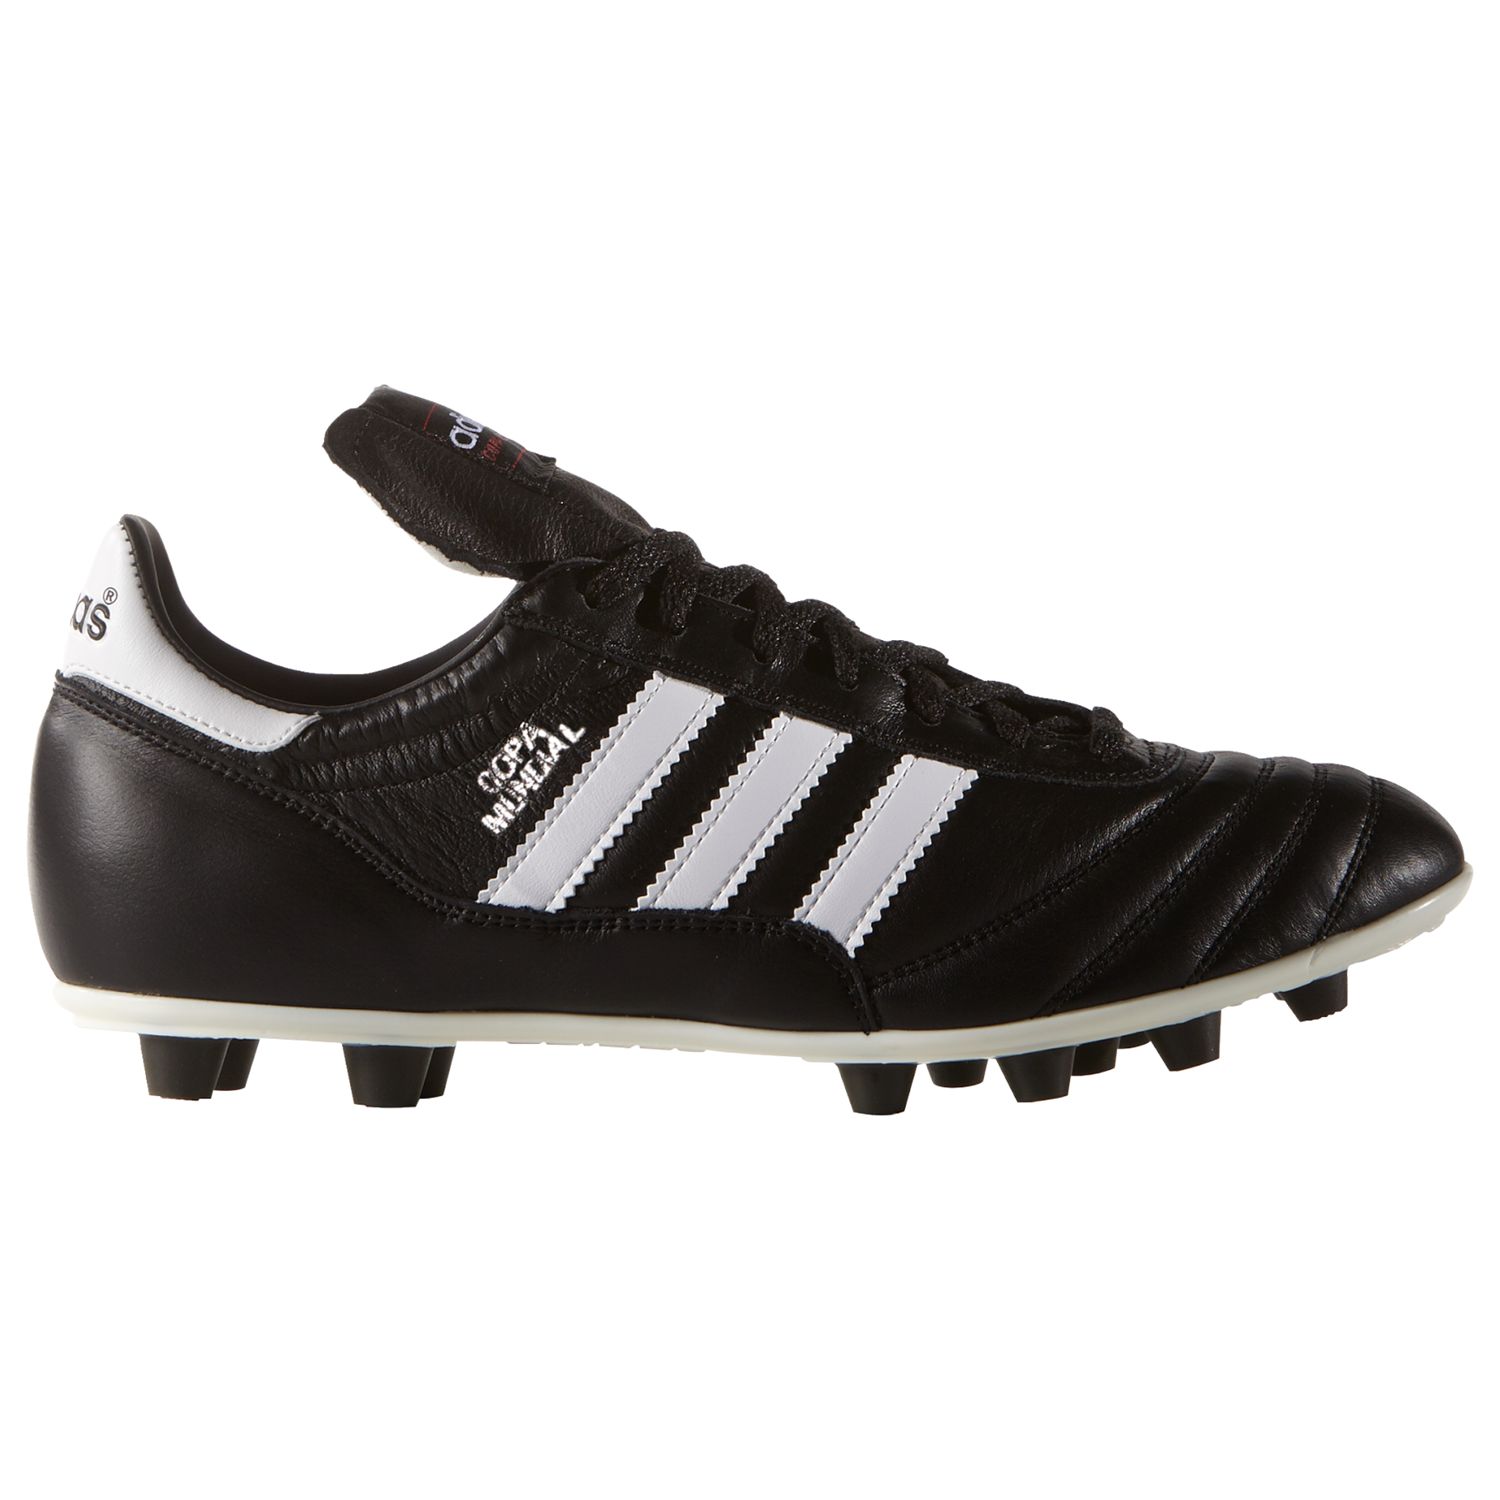 white and black football boots